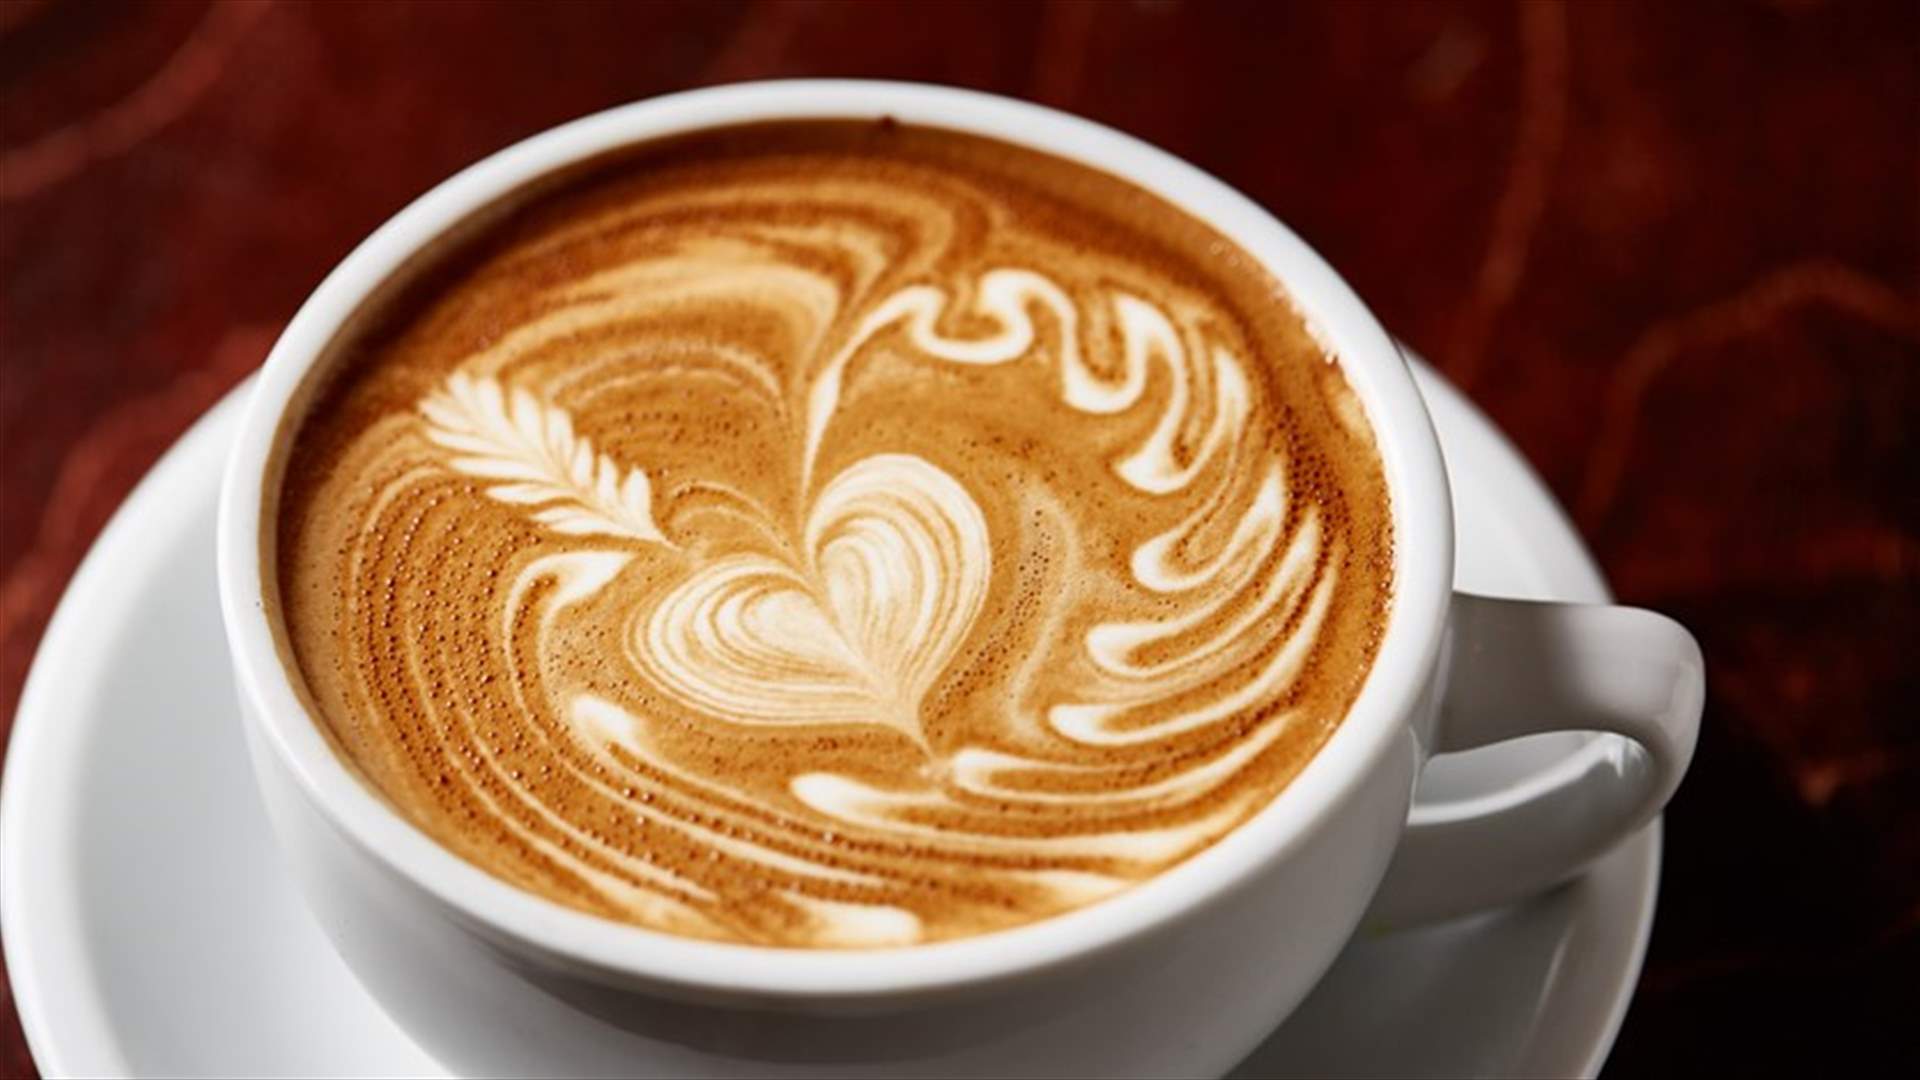 The Secret To Living Longer Is Coffee - Study